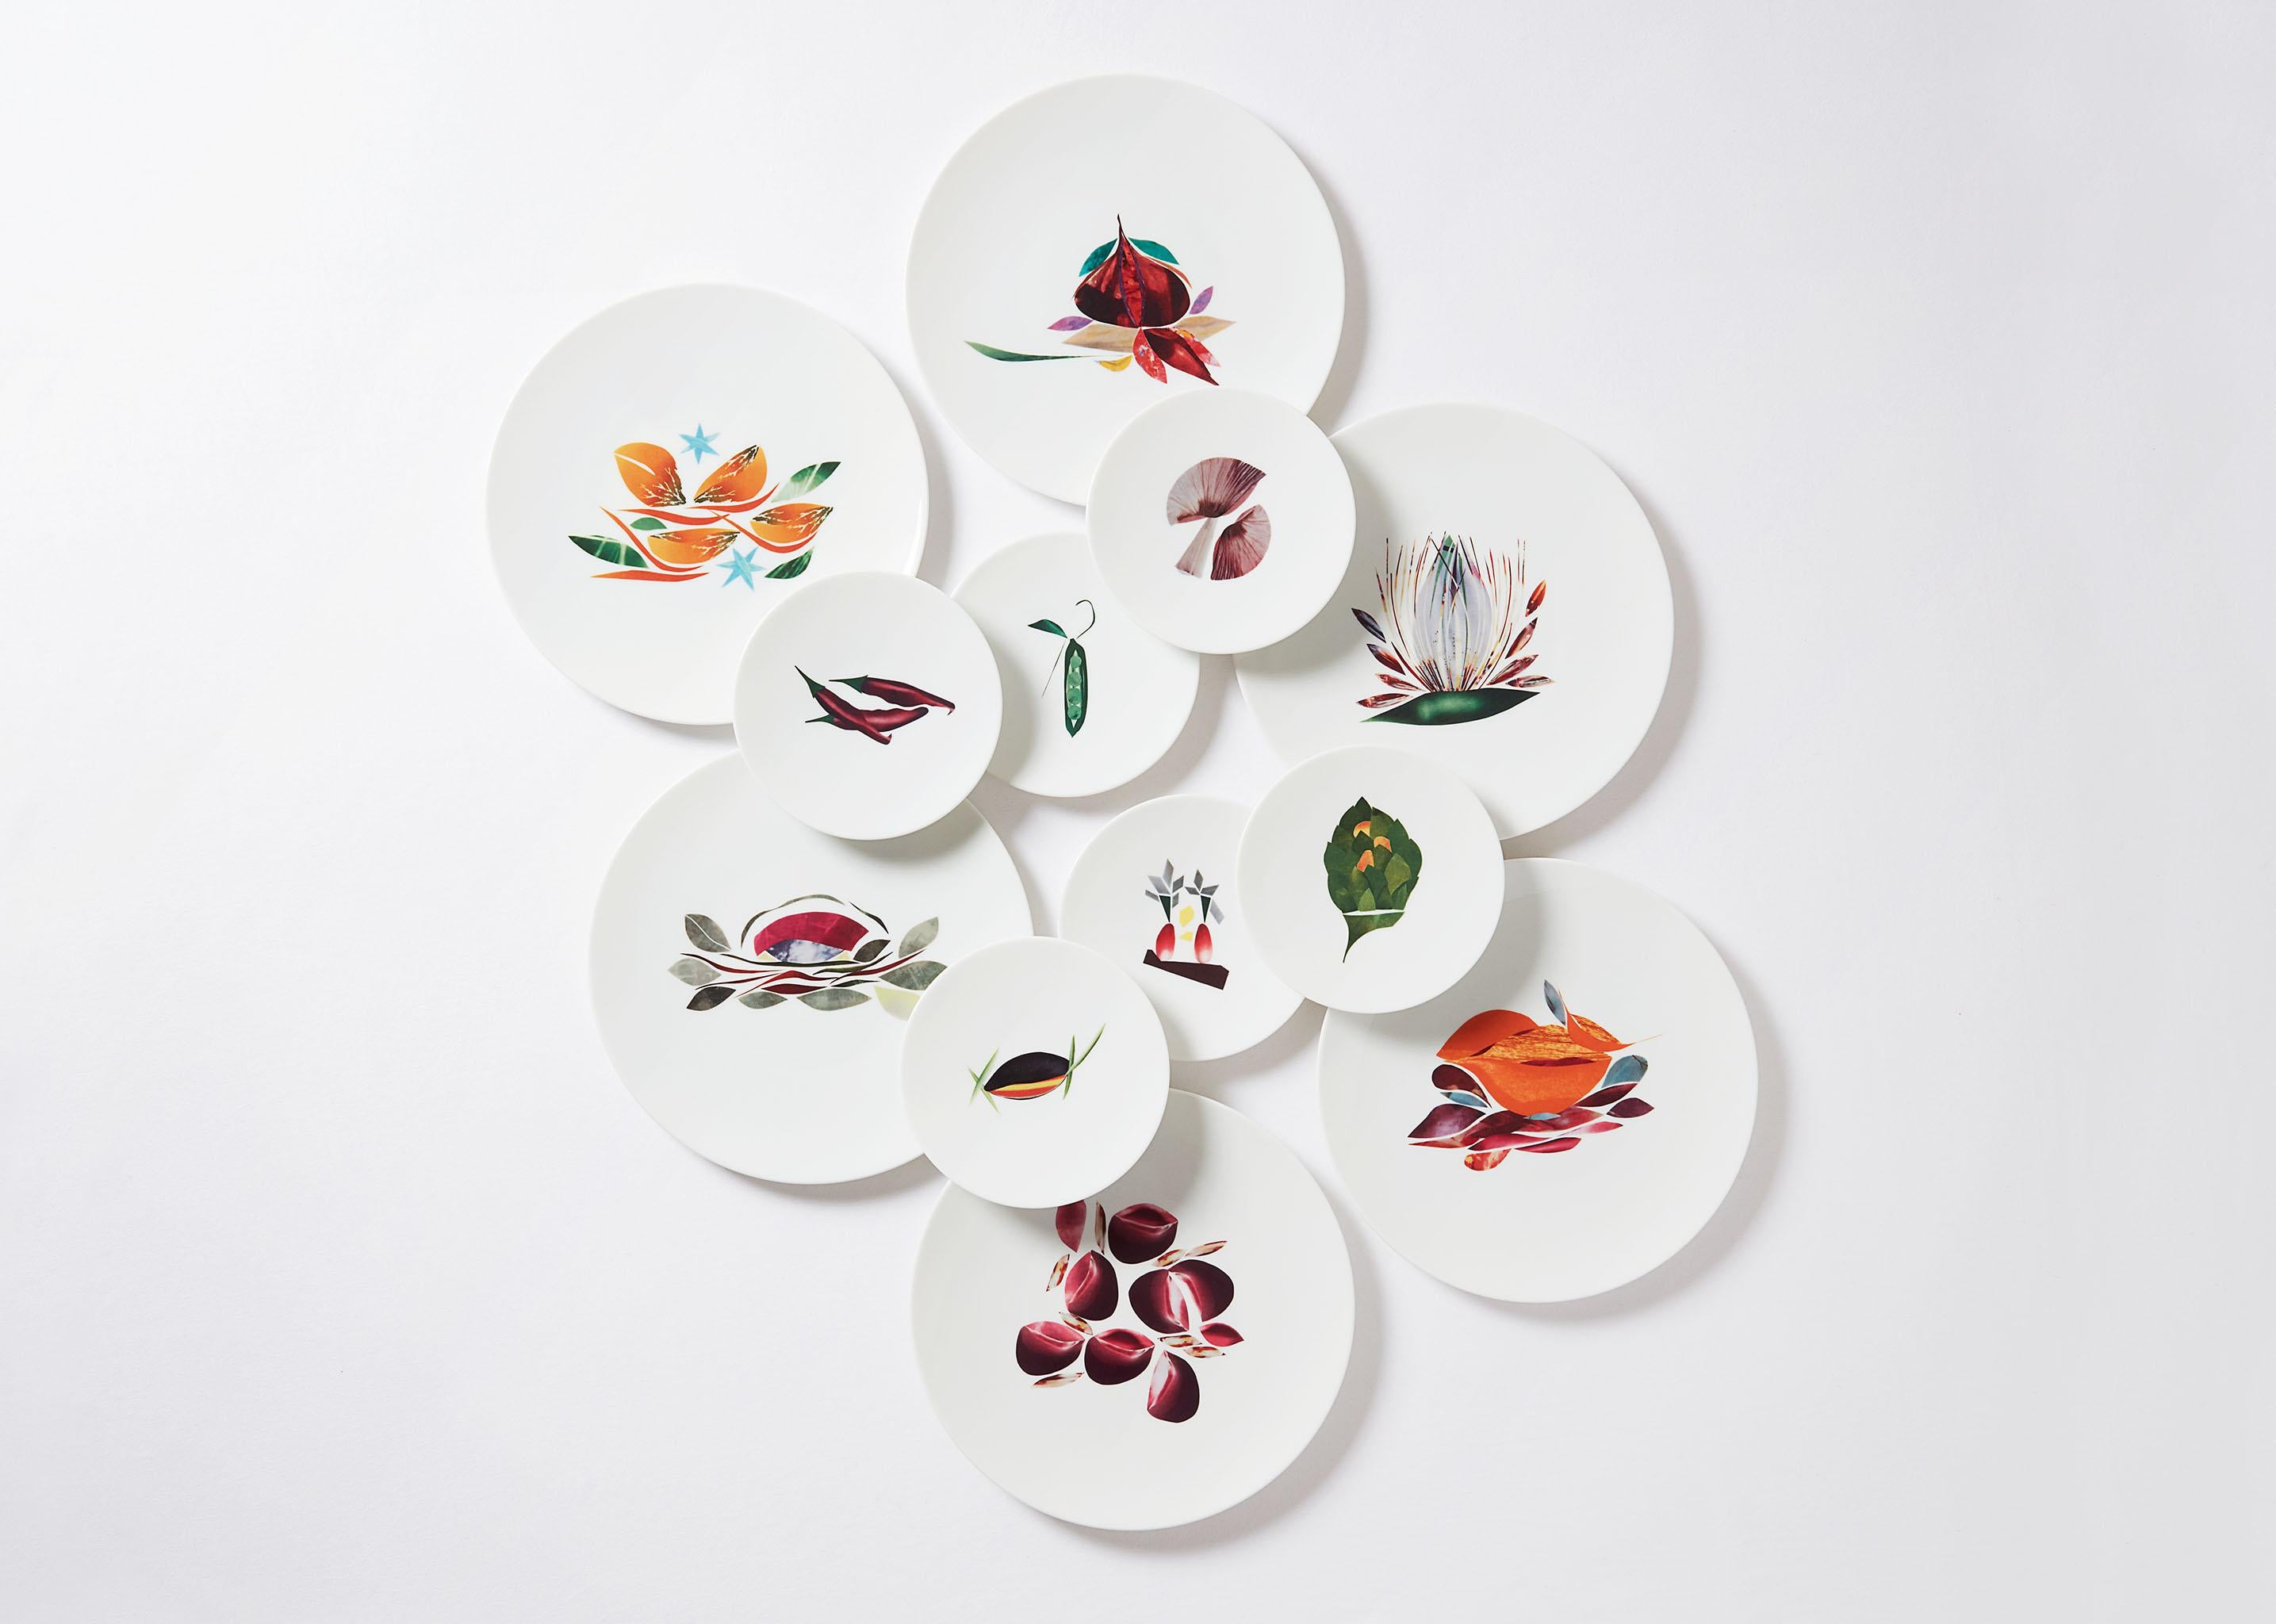 Dinner Porcelain Plate by the French Chef Alain Passard Model 